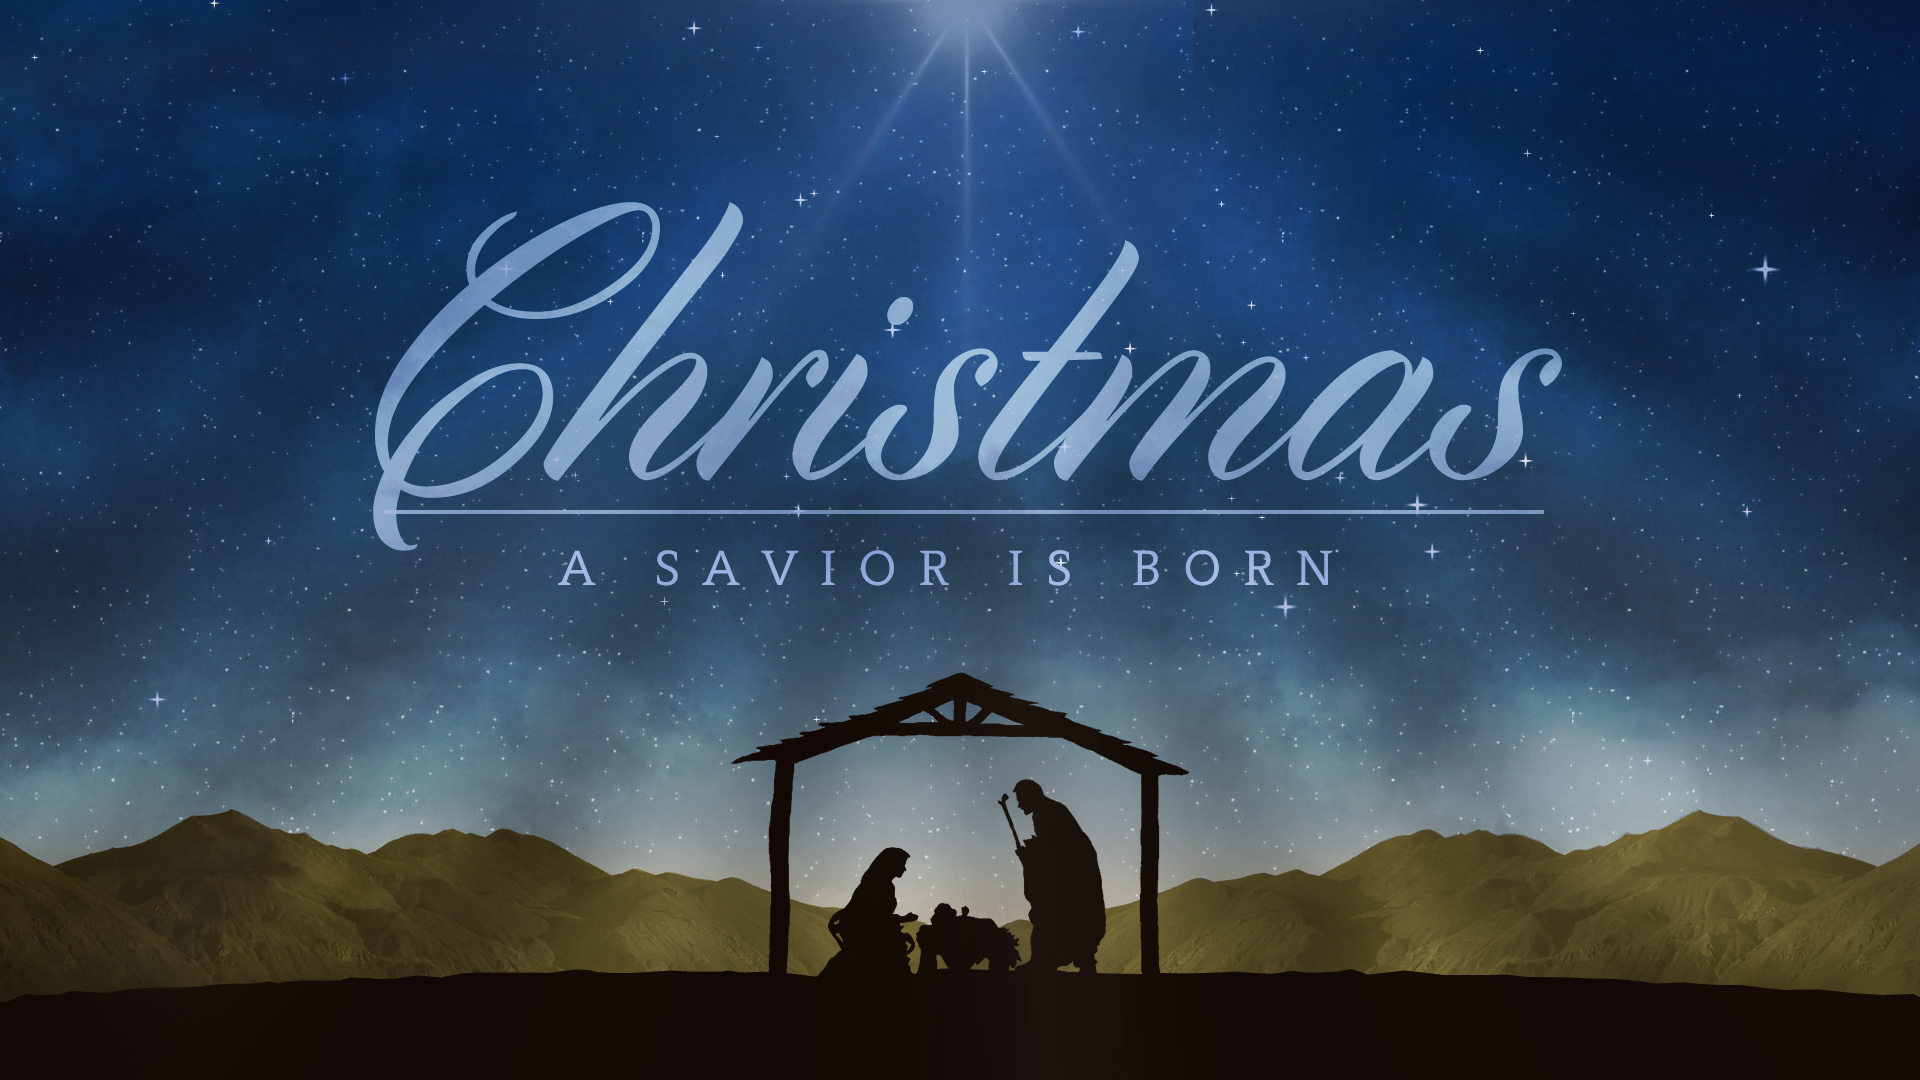 Christmas Season Will E Alive With The Love That Gave Us Immanuel